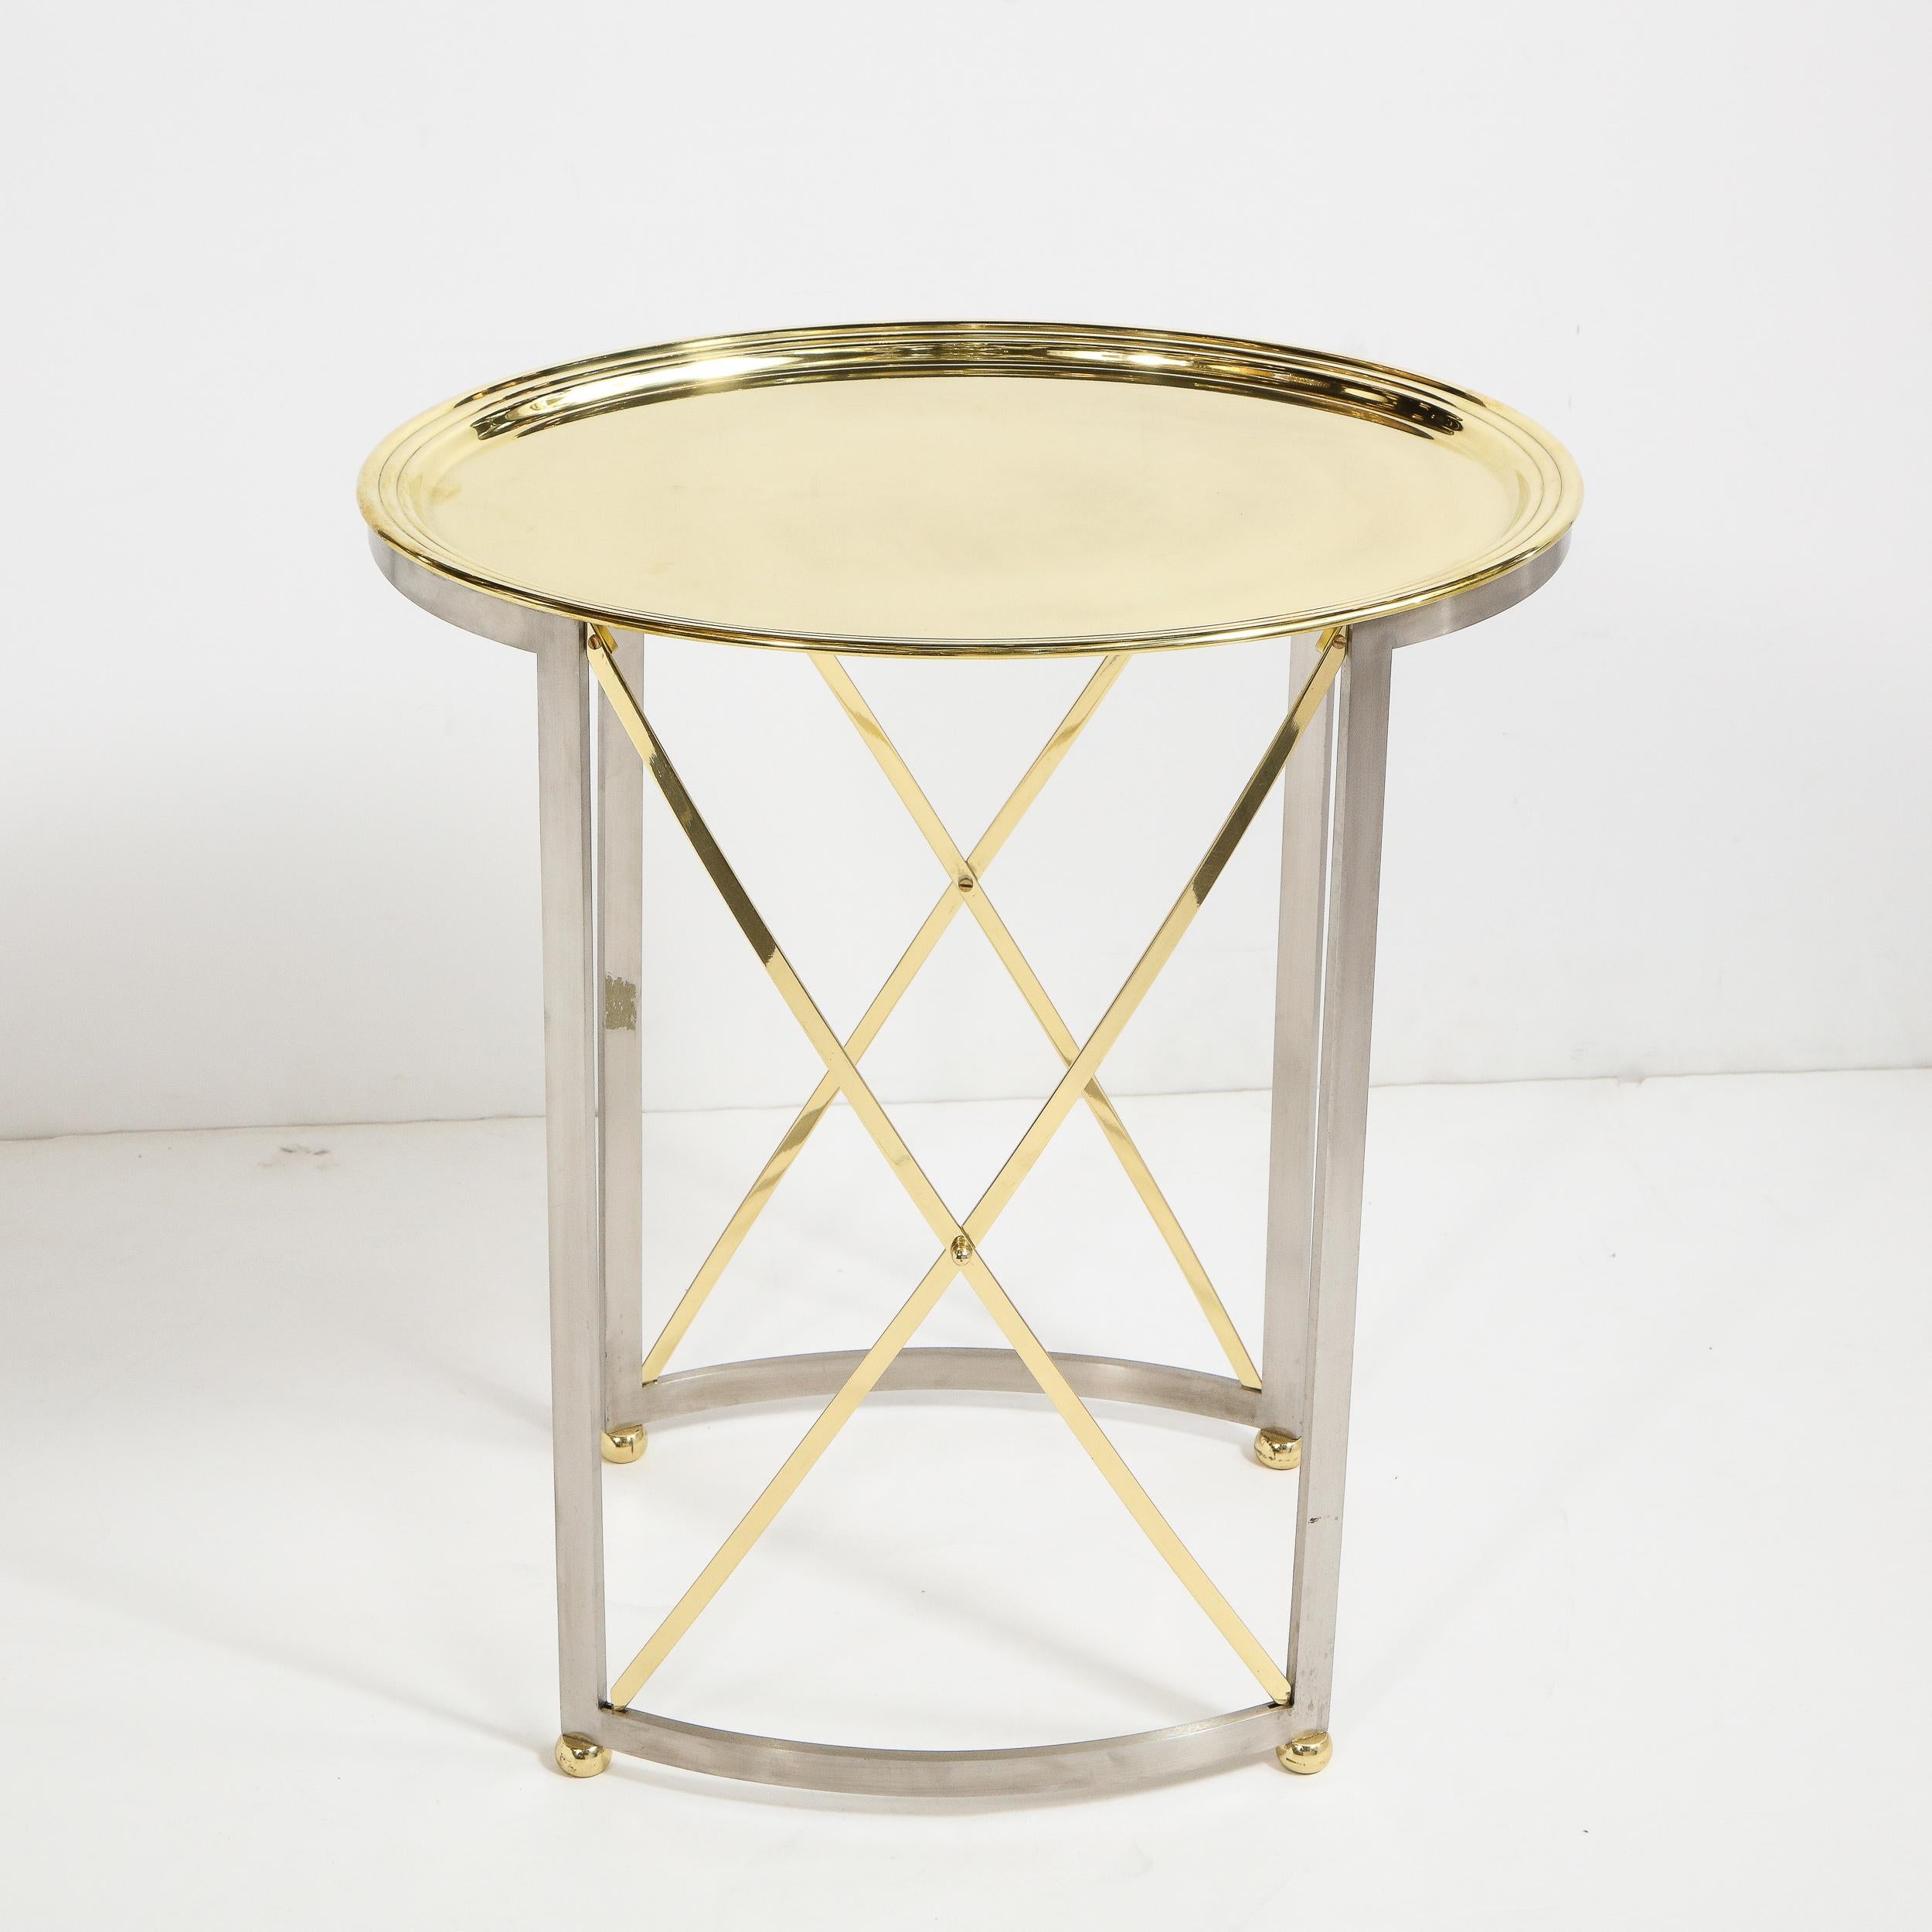 Late 20th Century Mid-Century Brass & Nickel Side Table with Removable Tray Top by Maison Jansen